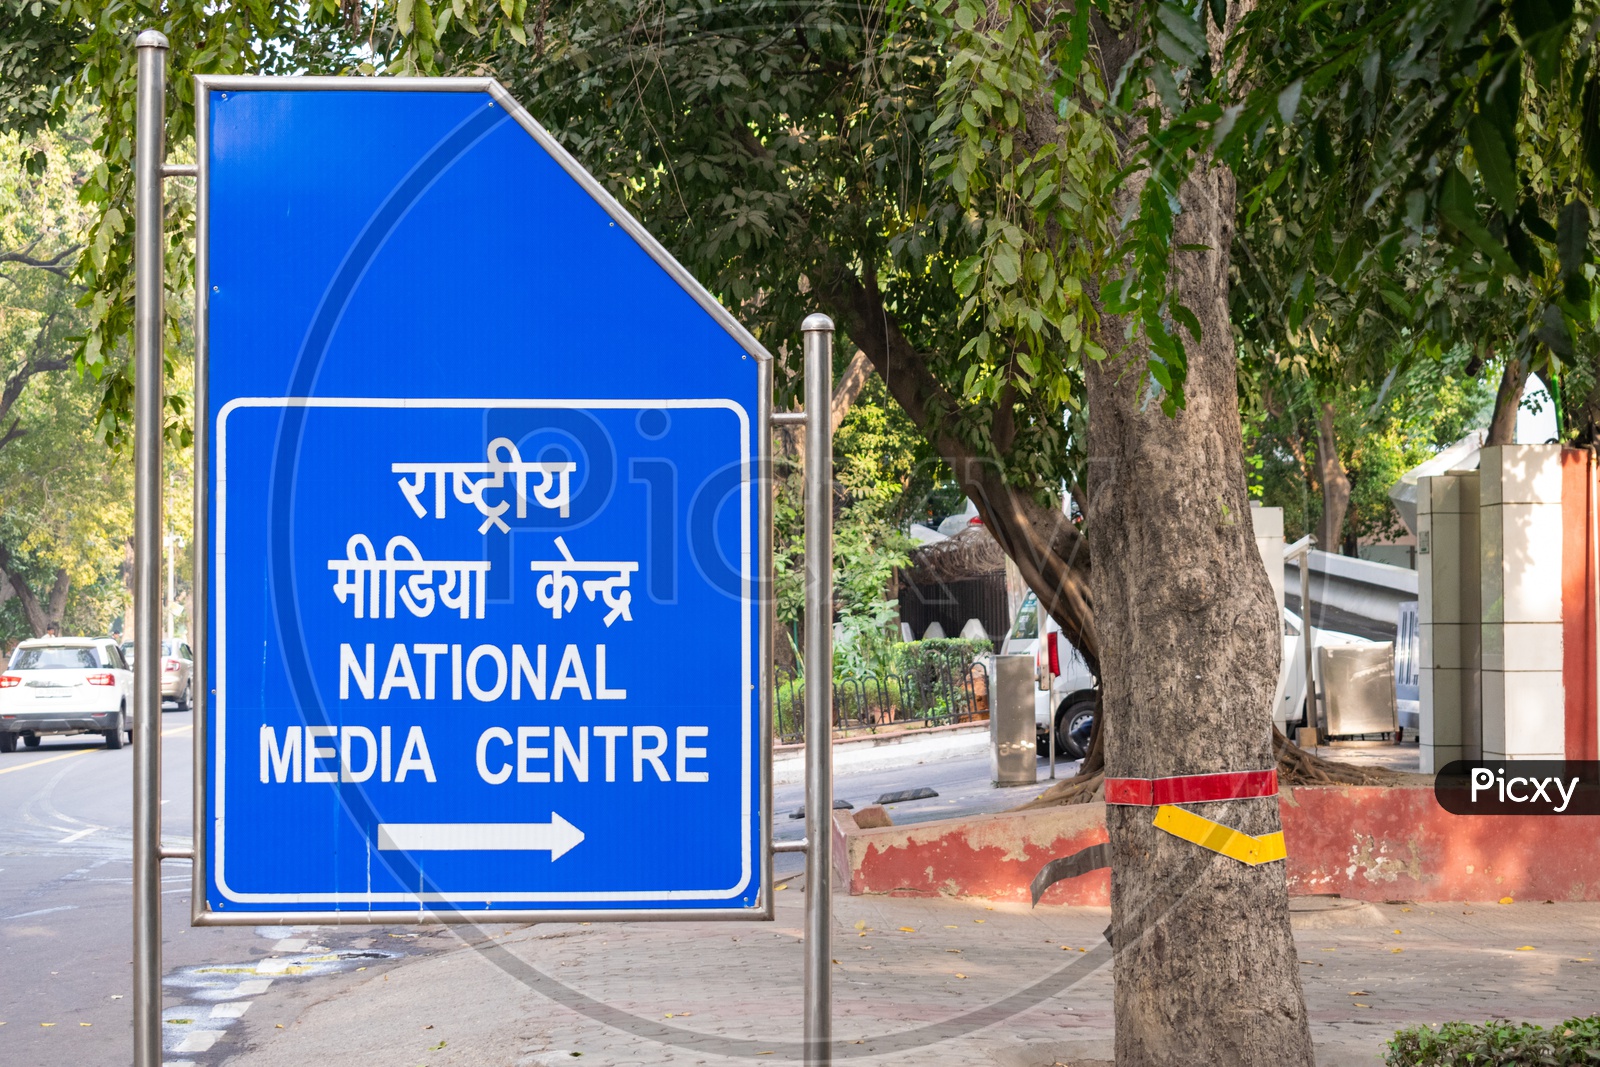 Sign board of National Media Centre